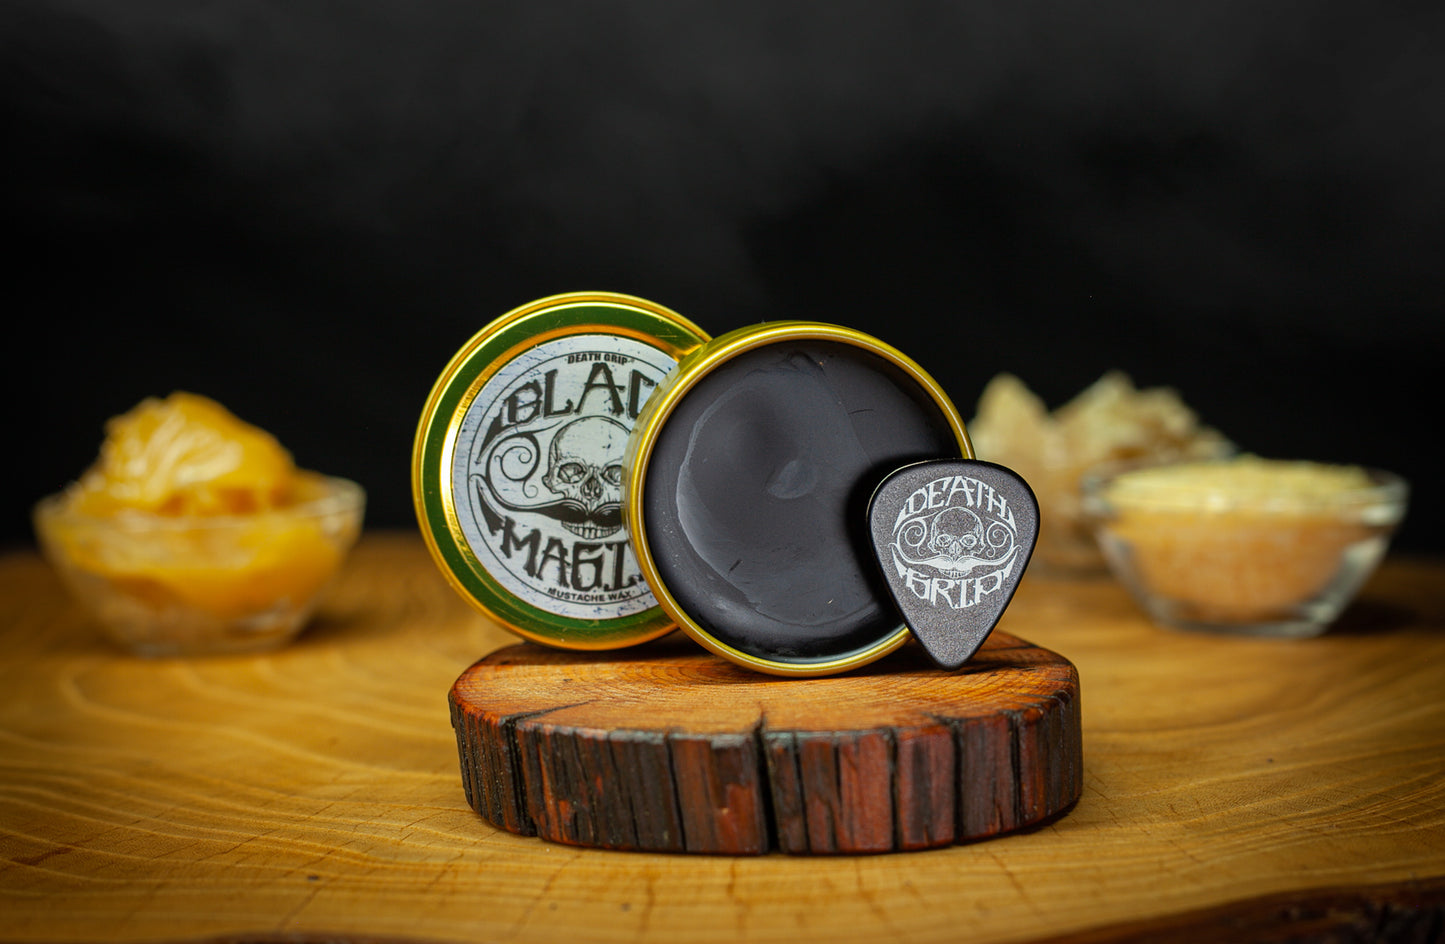 Death Grip & Black Magic Death Grip Extra Strong Hold Mustache Waxes Set